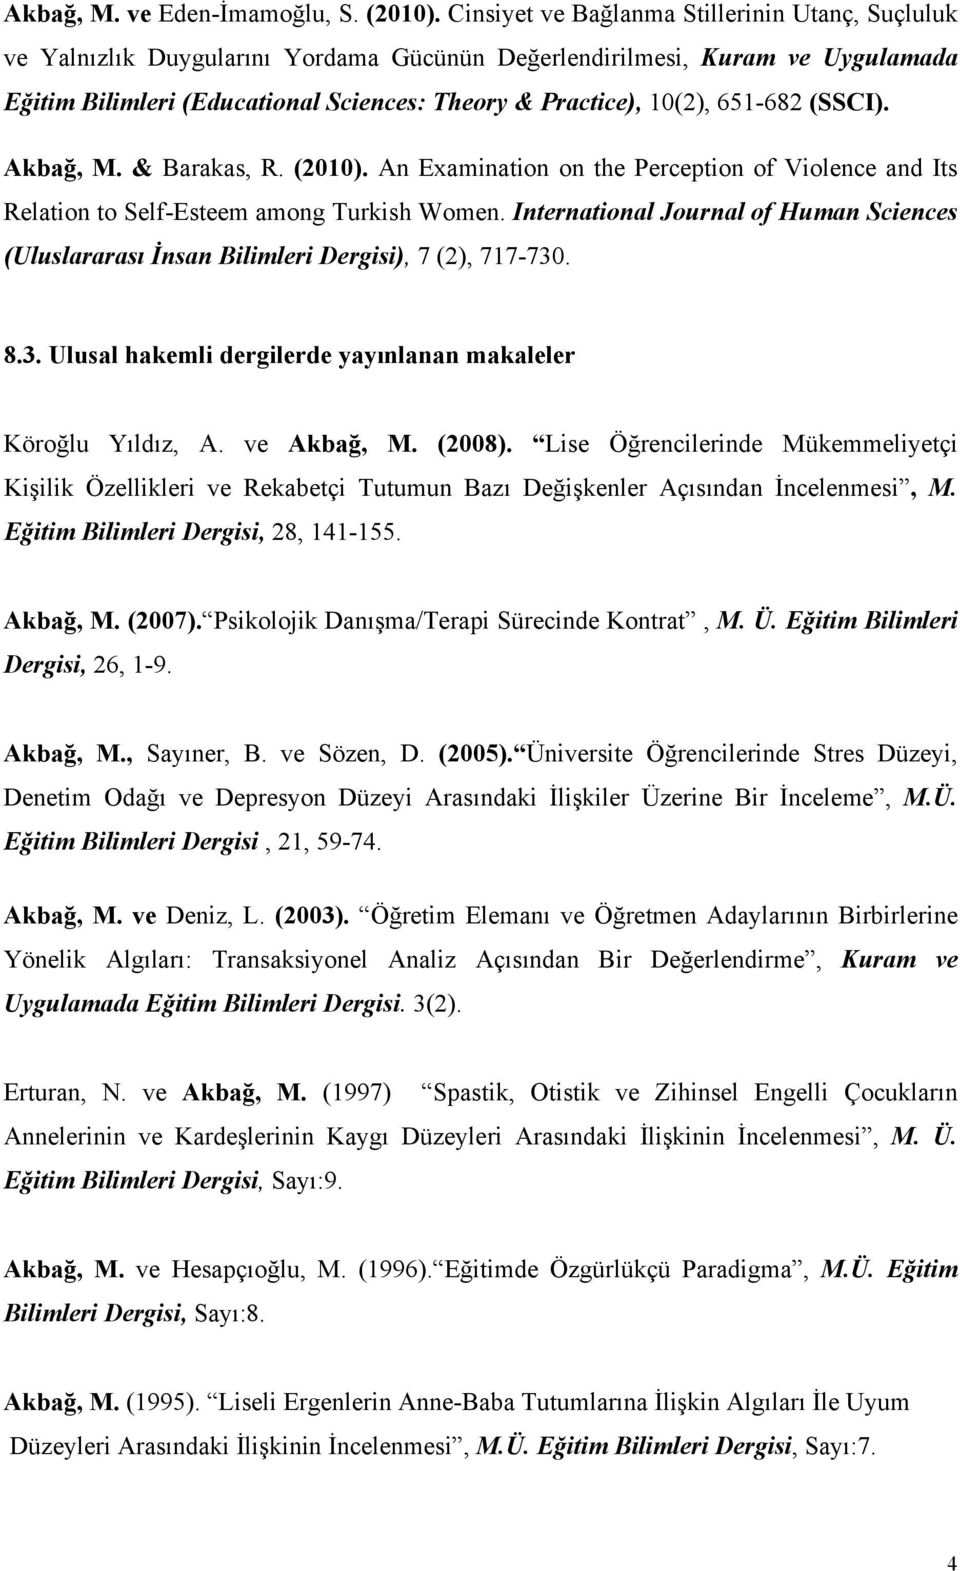 651-682 (SSCI). Akbağ, M. & Barakas, R. (2010). An Examination on the Perception of Violence and Its Relation to Self-Esteem among Turkish Women.